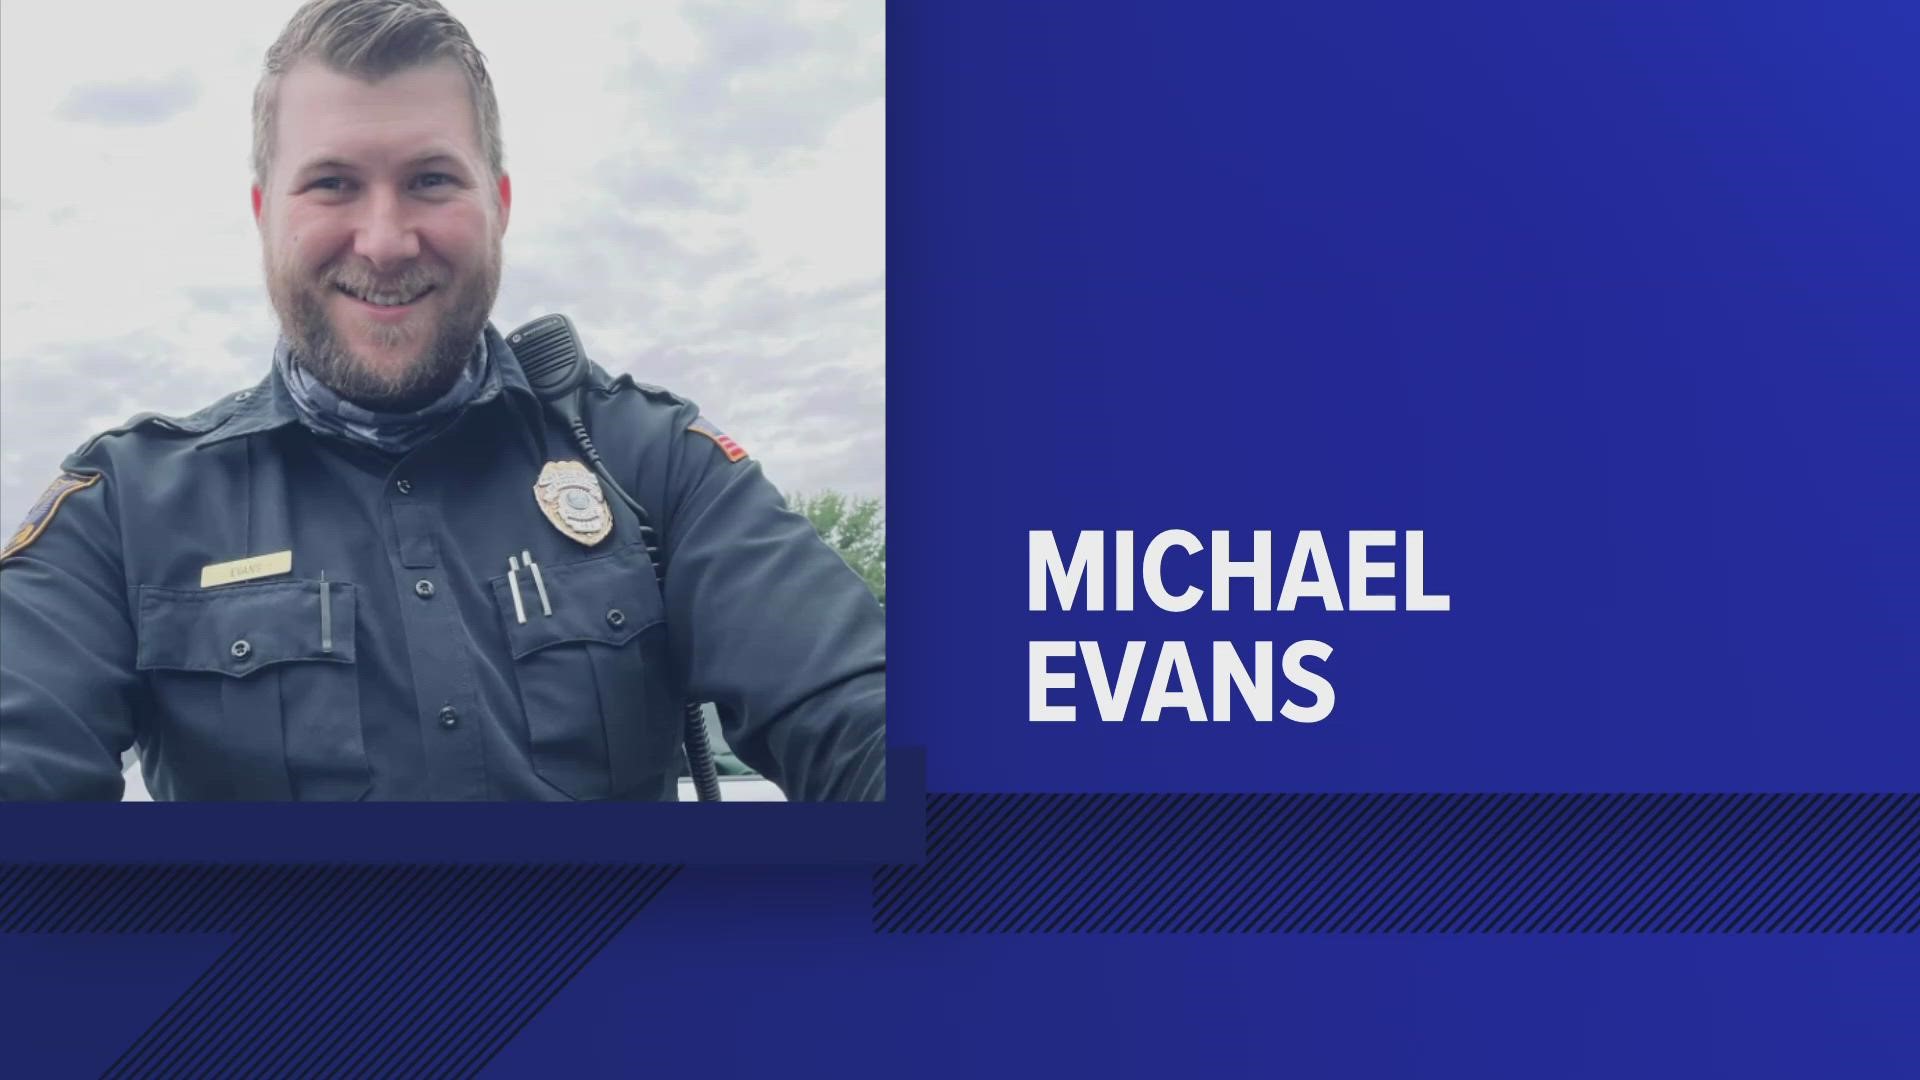 Prior to joining the Germantown Police Department in 2014, Michael Evans served in the U.S. army for nine years. He completed two tours of duty in Iraq.